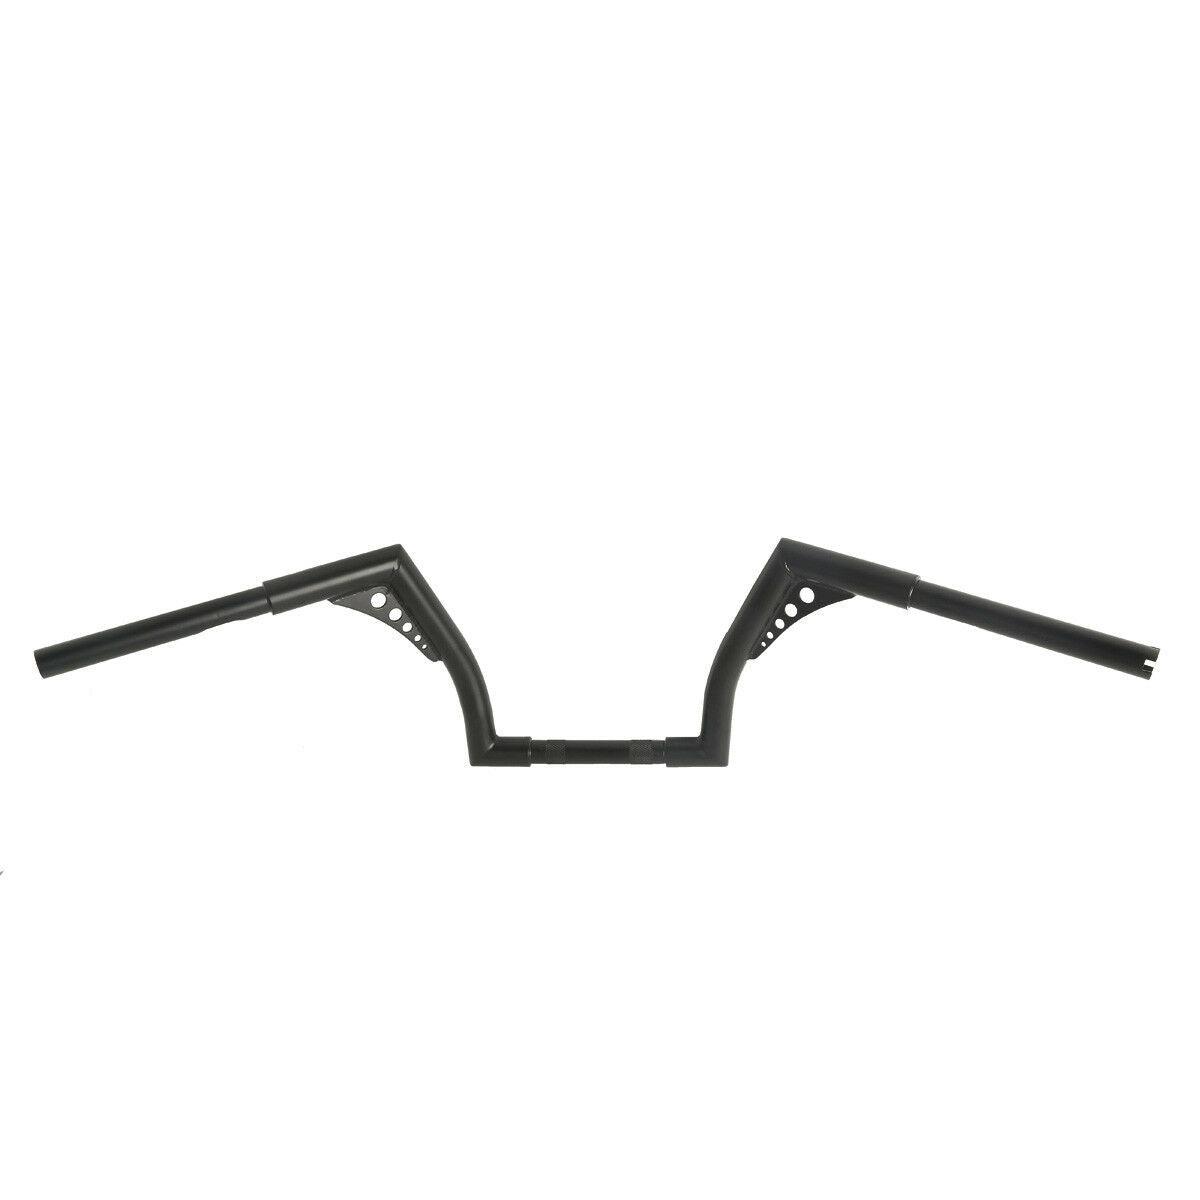 1 1/4" Fat 10" Rise Hangers Handlebar Fit for Harley Softail Sportster XL 883 - Moto Life Products